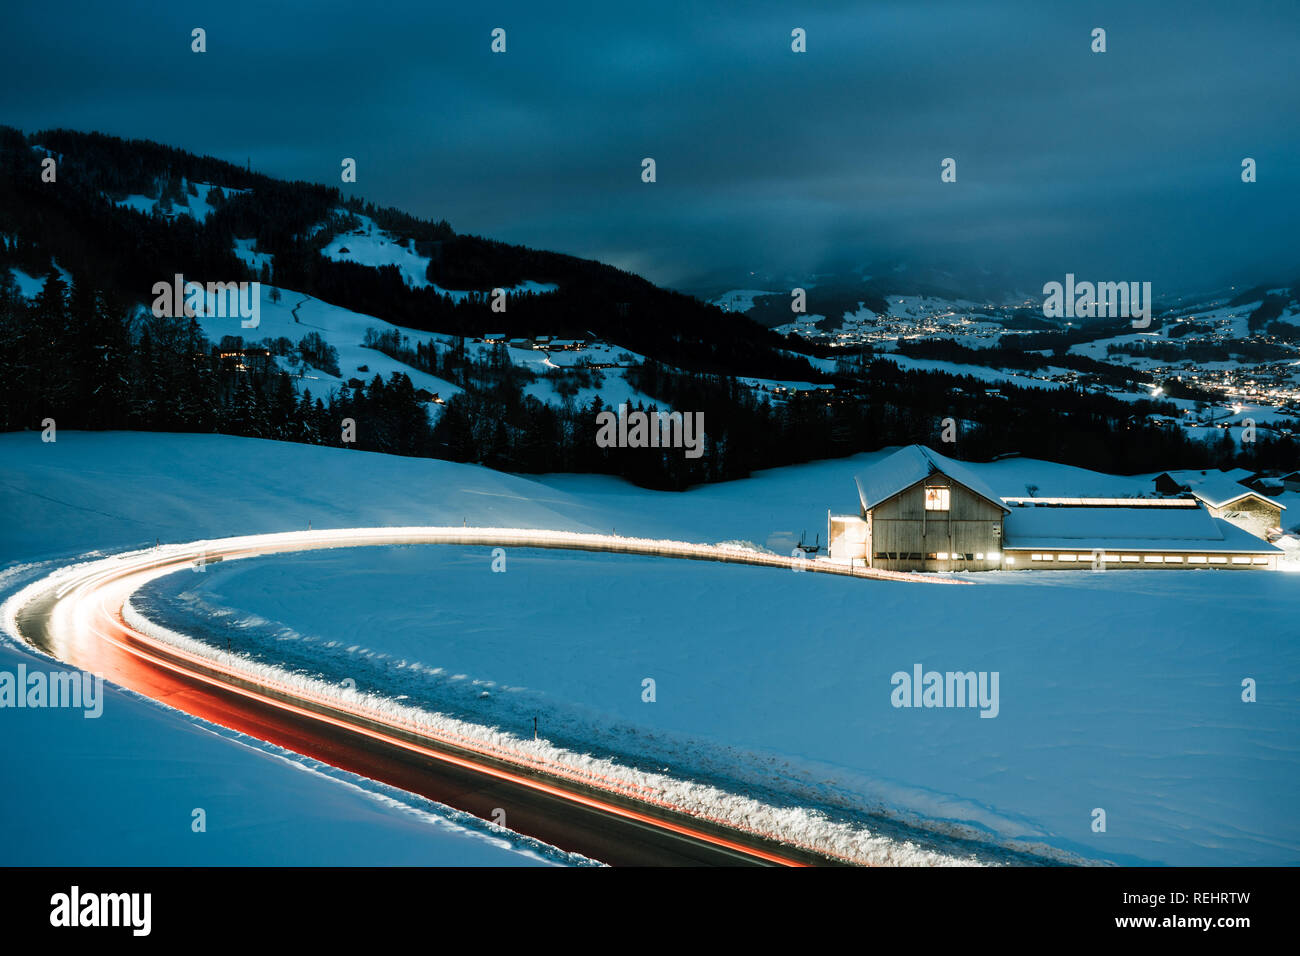 Long exposed night photography of cars driving through a snowy mountain road in the alps of Austria. Stock Photo